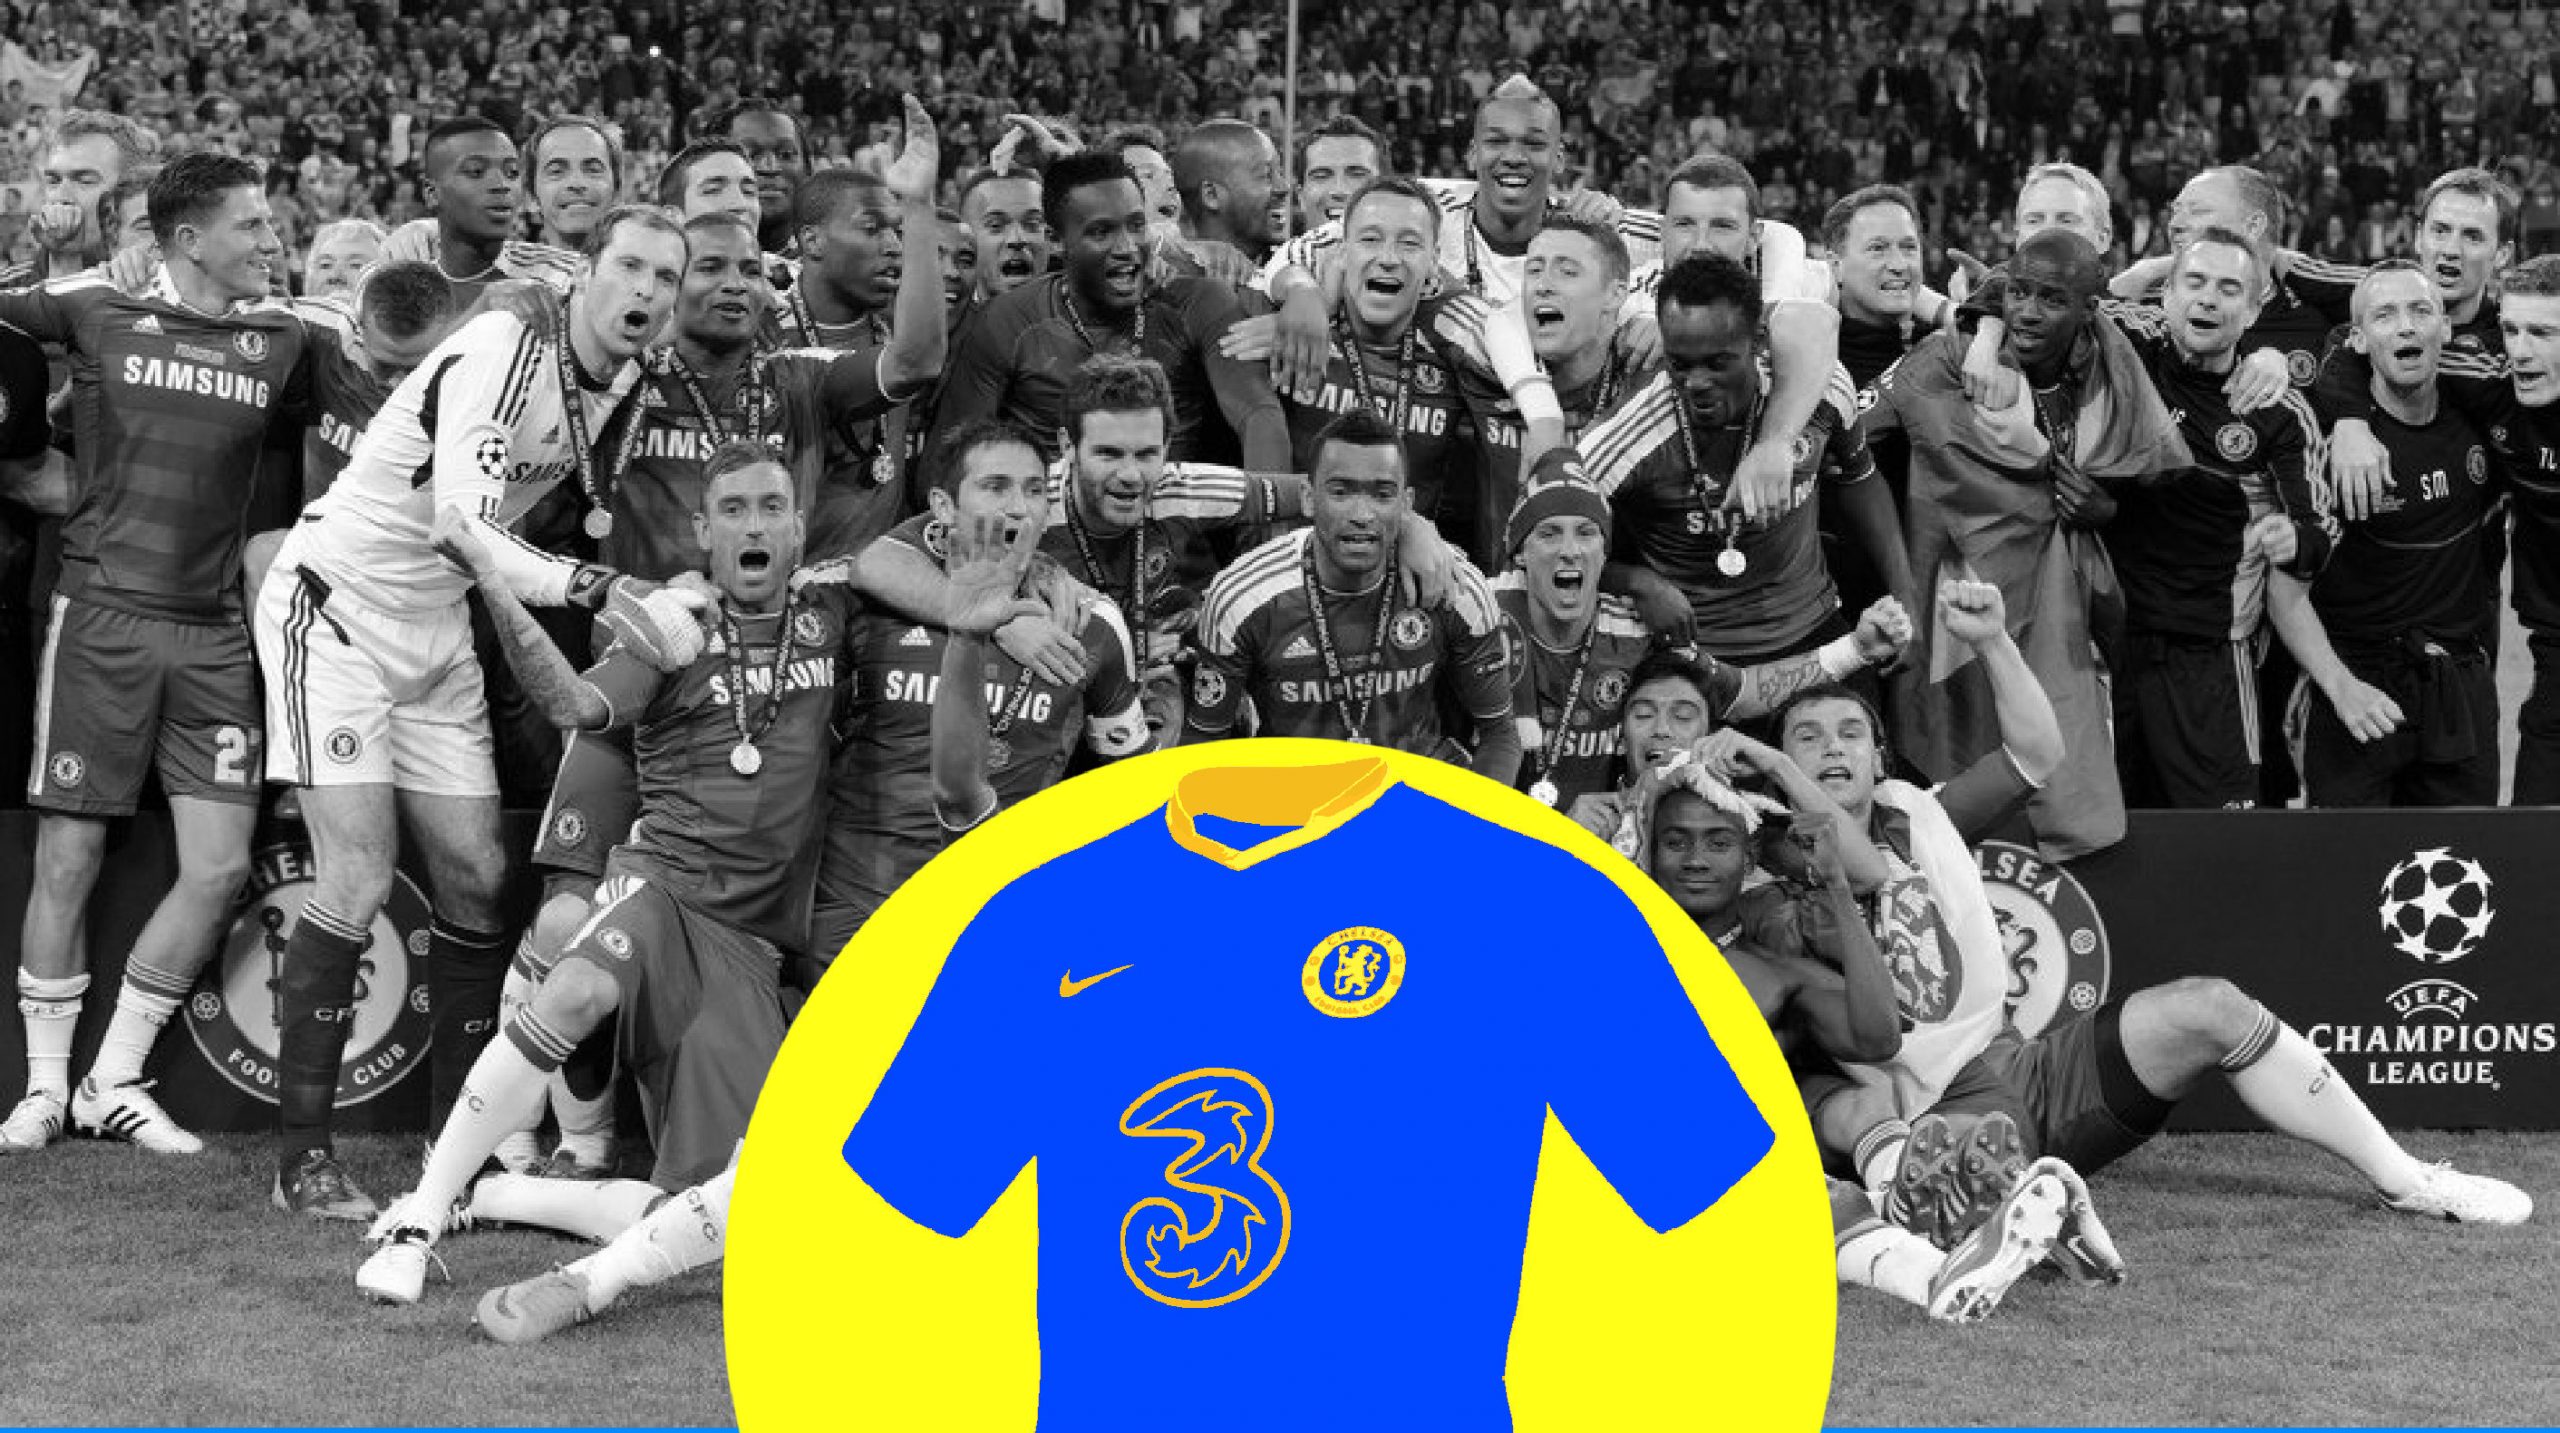 New: Minimalistic anniversary kit marks an iconic moment in Chelsea history